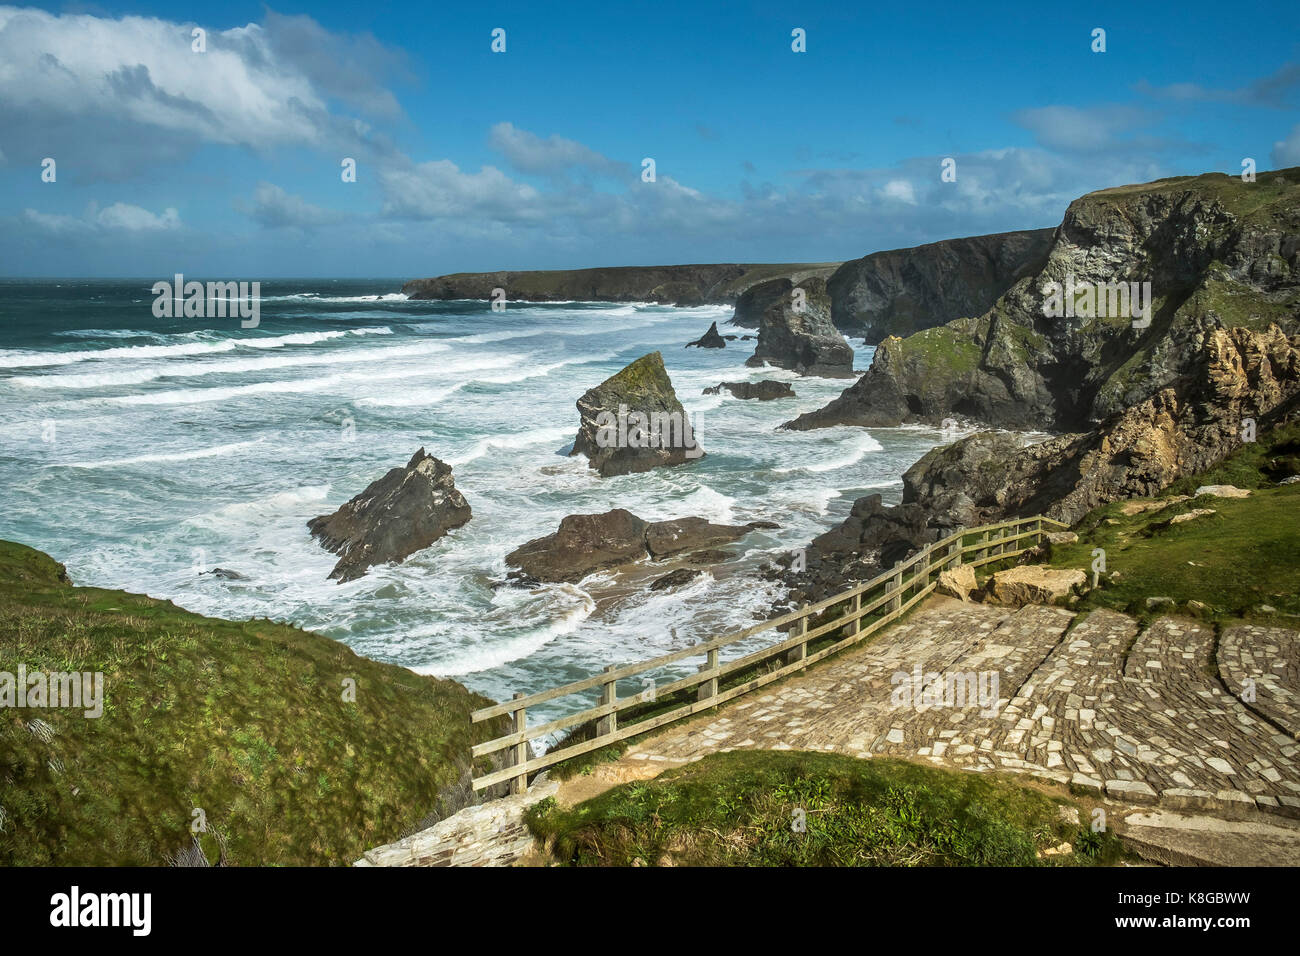 Bedruthan Steps - rough sea conditions at Bedruthan Steps on the North Cornwall coast. Stock Photo